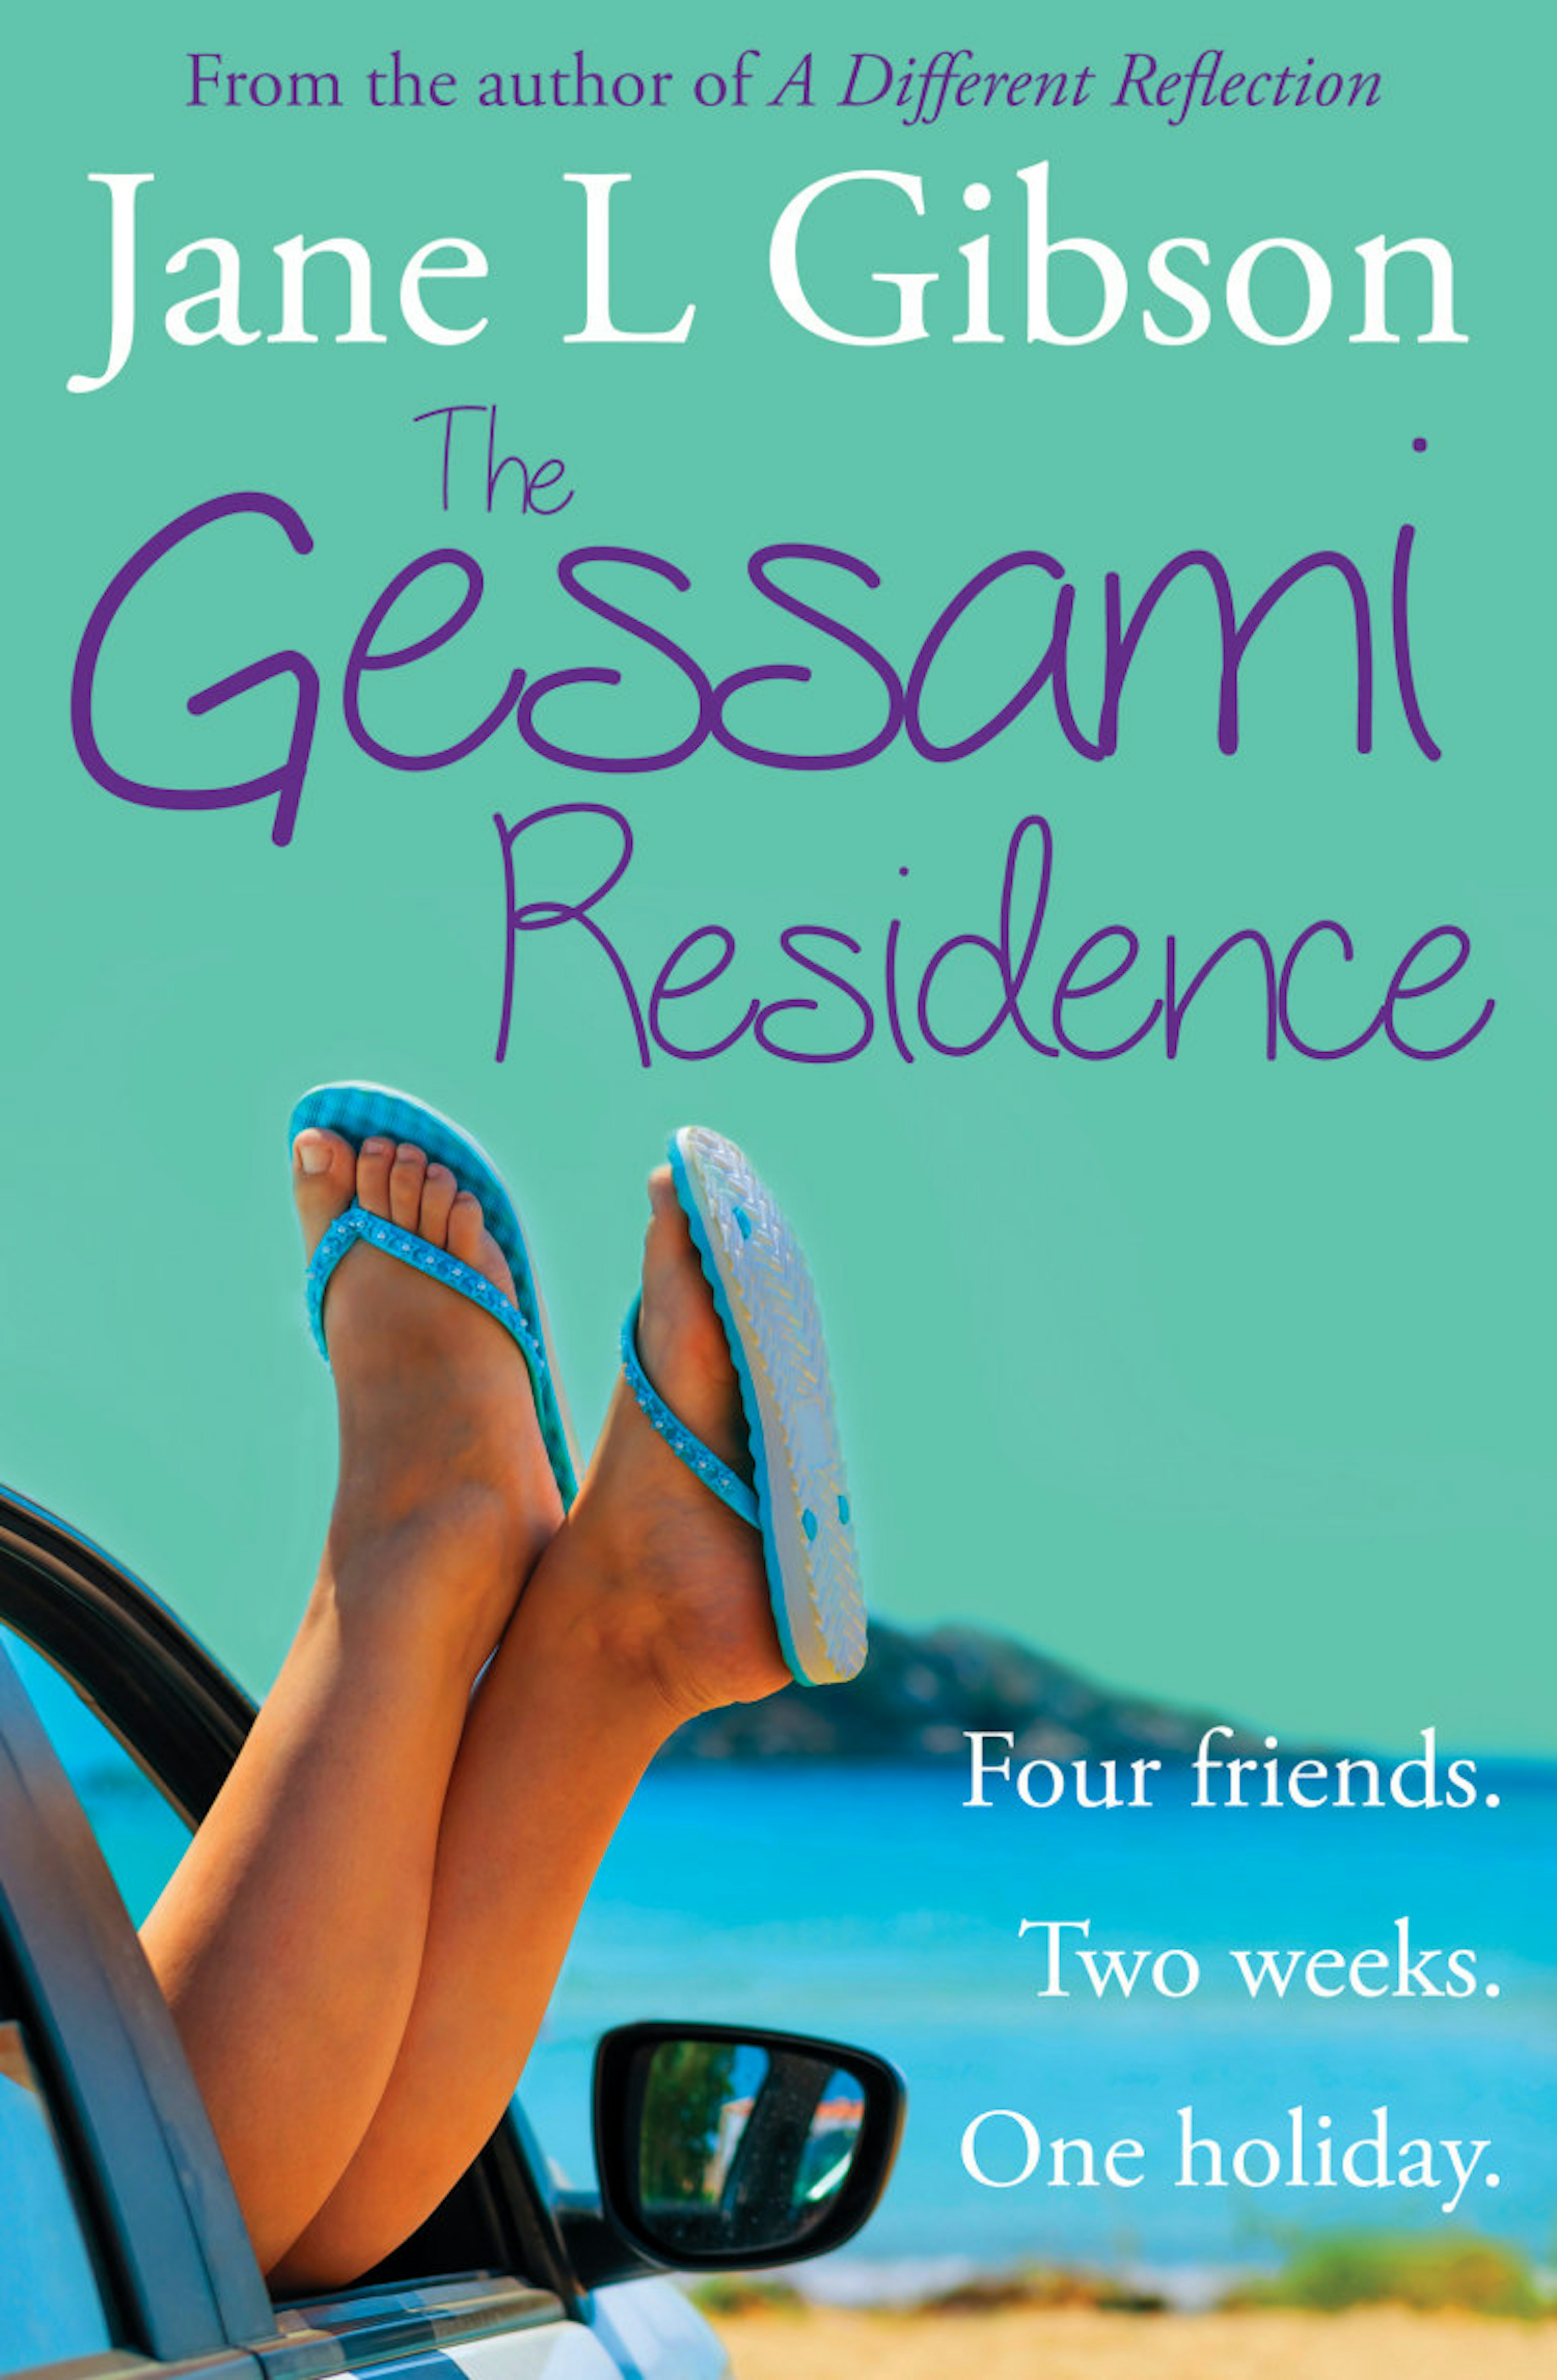 The Gessami Residence